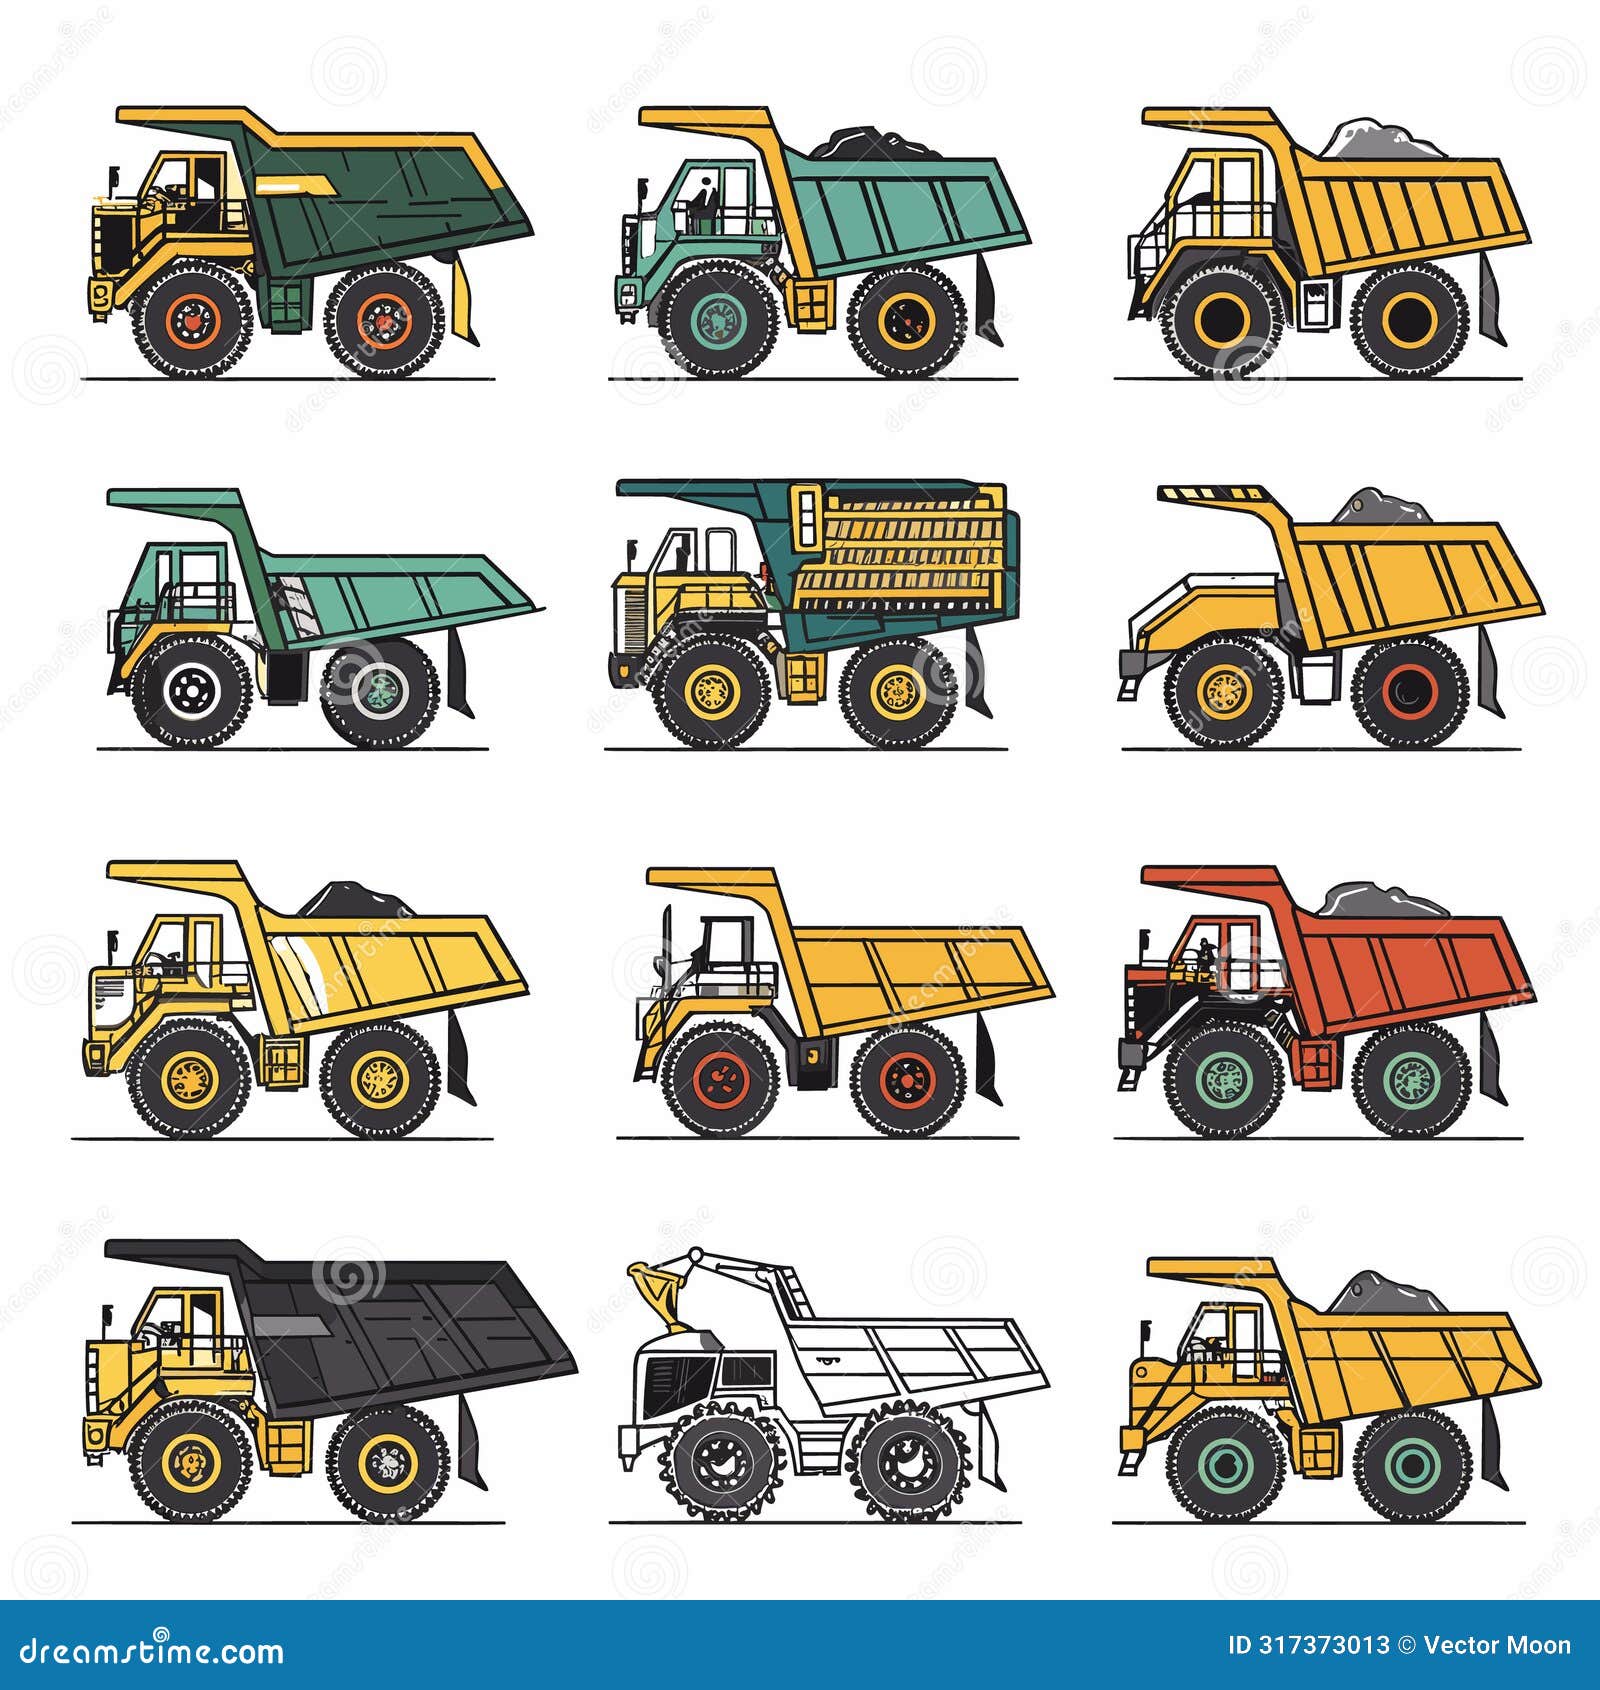 set colorful dump trucks various s. industrial mining equipment loads illustrated. heavy